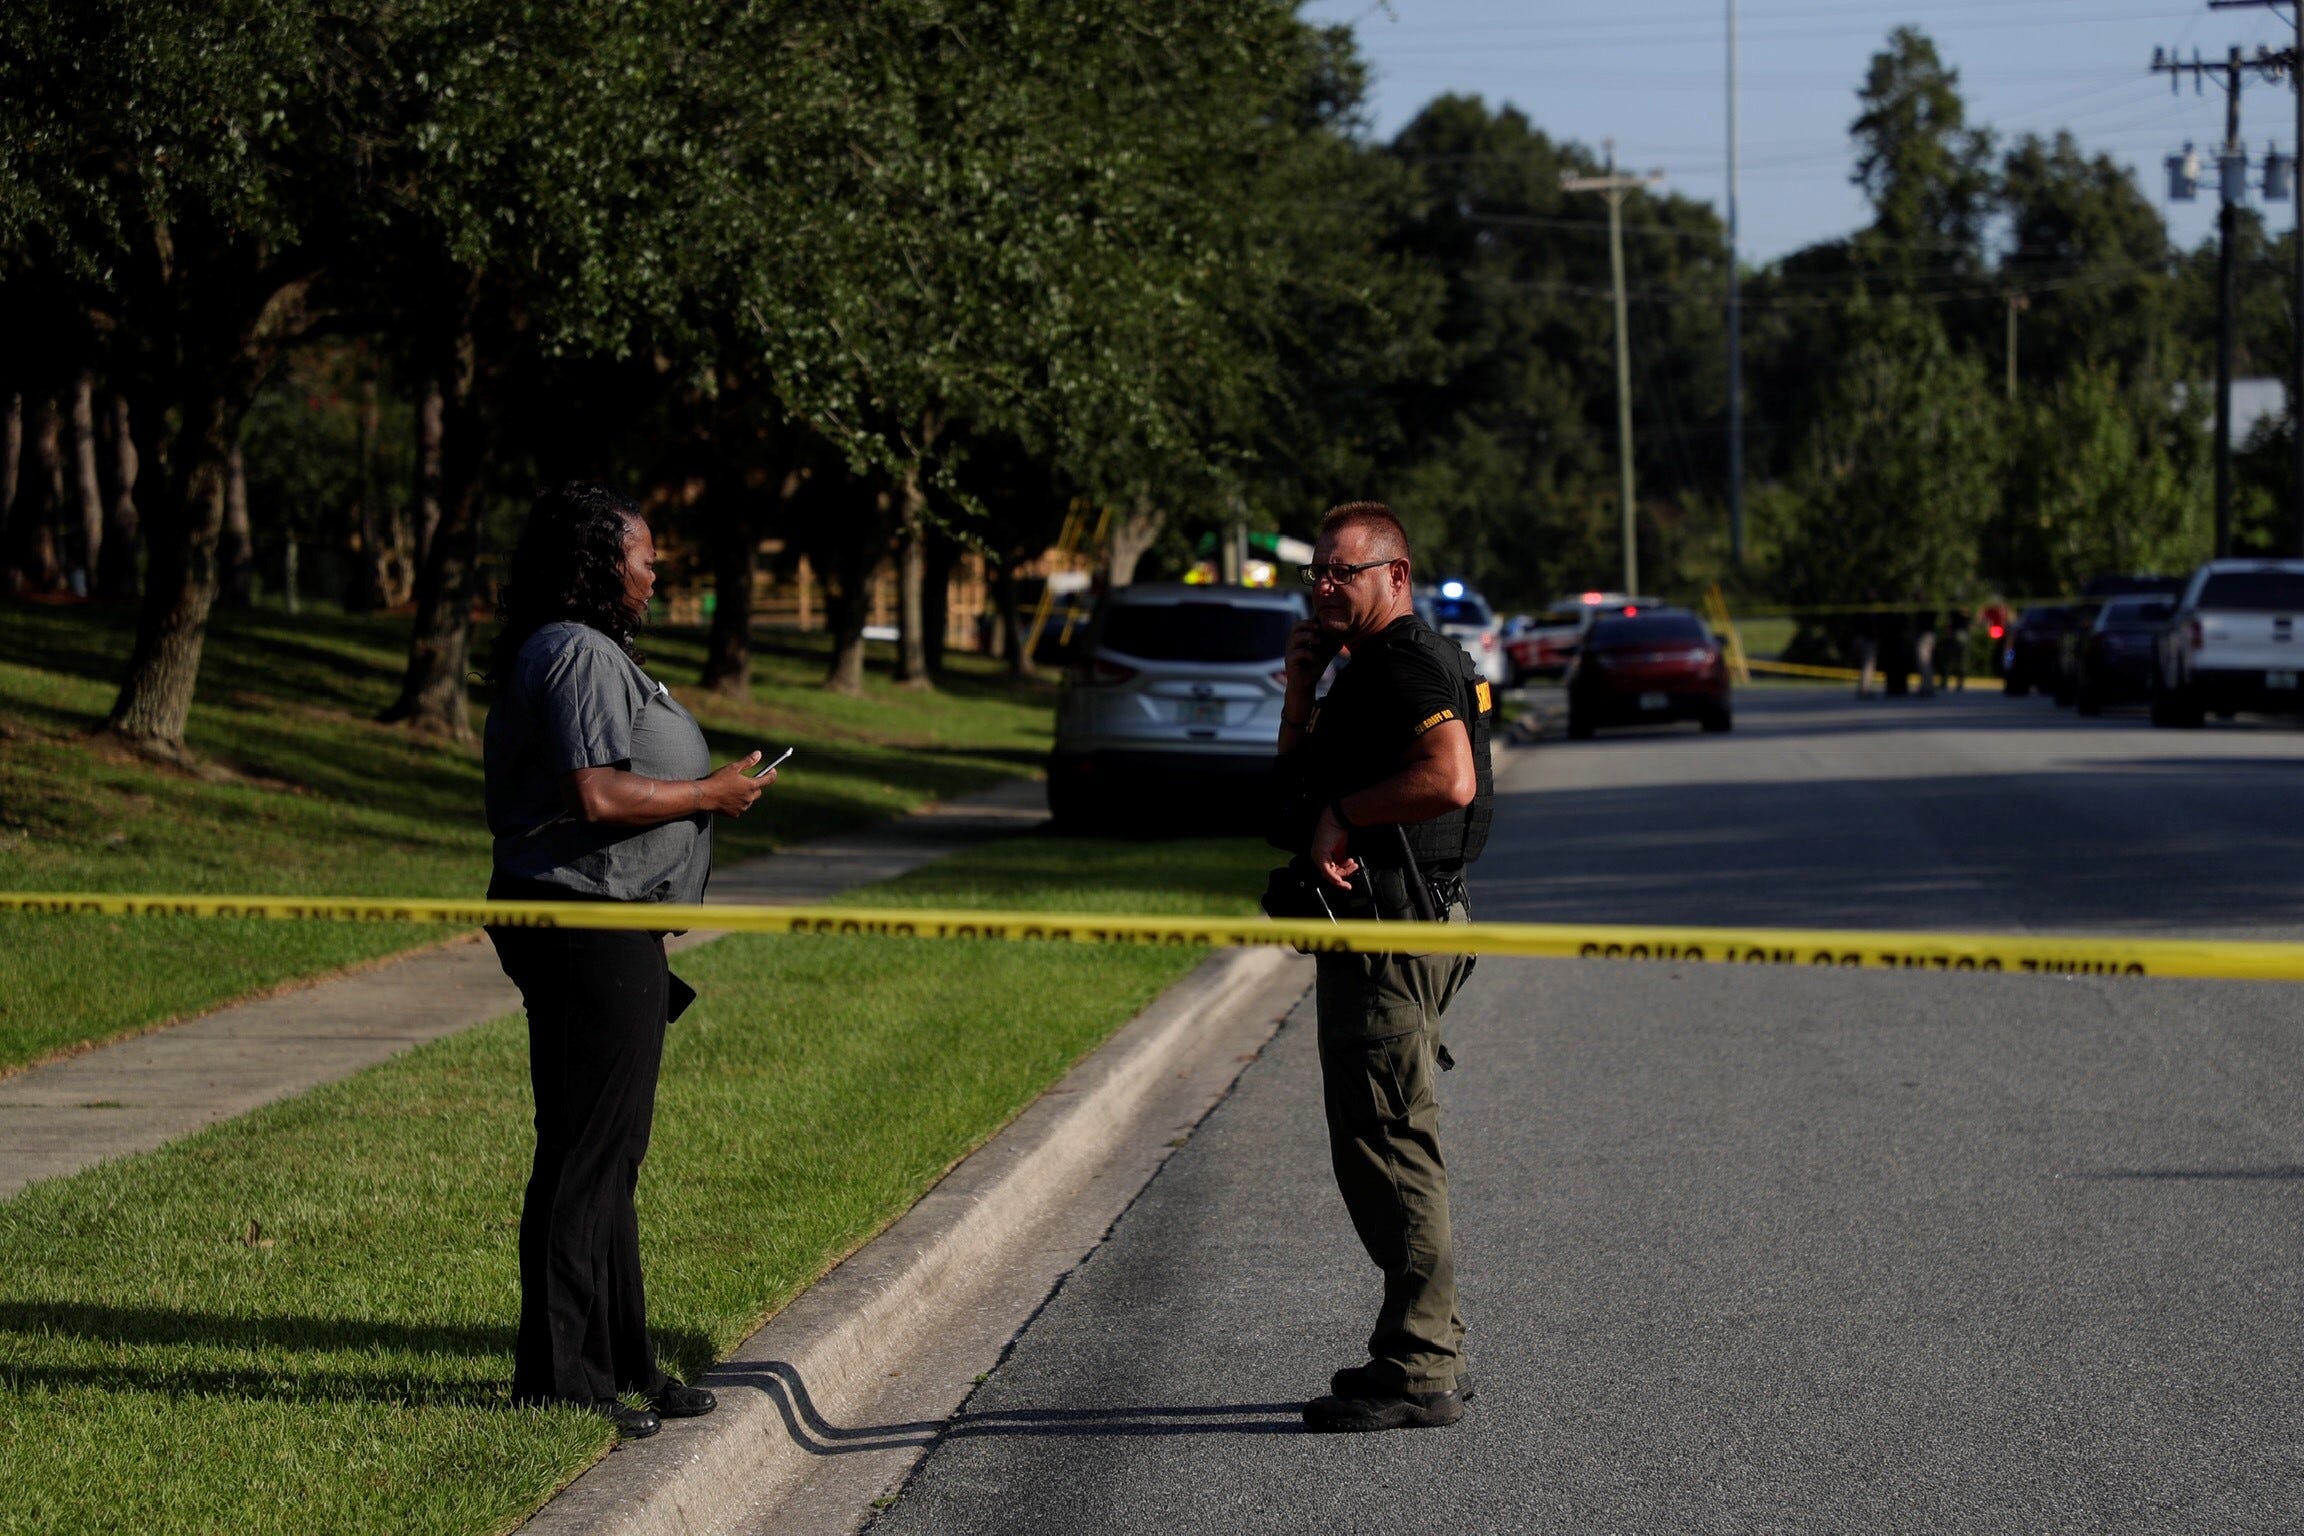 PHOTO: A woman talks to an officer on scene after a relative was stabbed before a job interview at Dyke Industries on Sept. 11, 2019, in Tallahassee, Fla.
